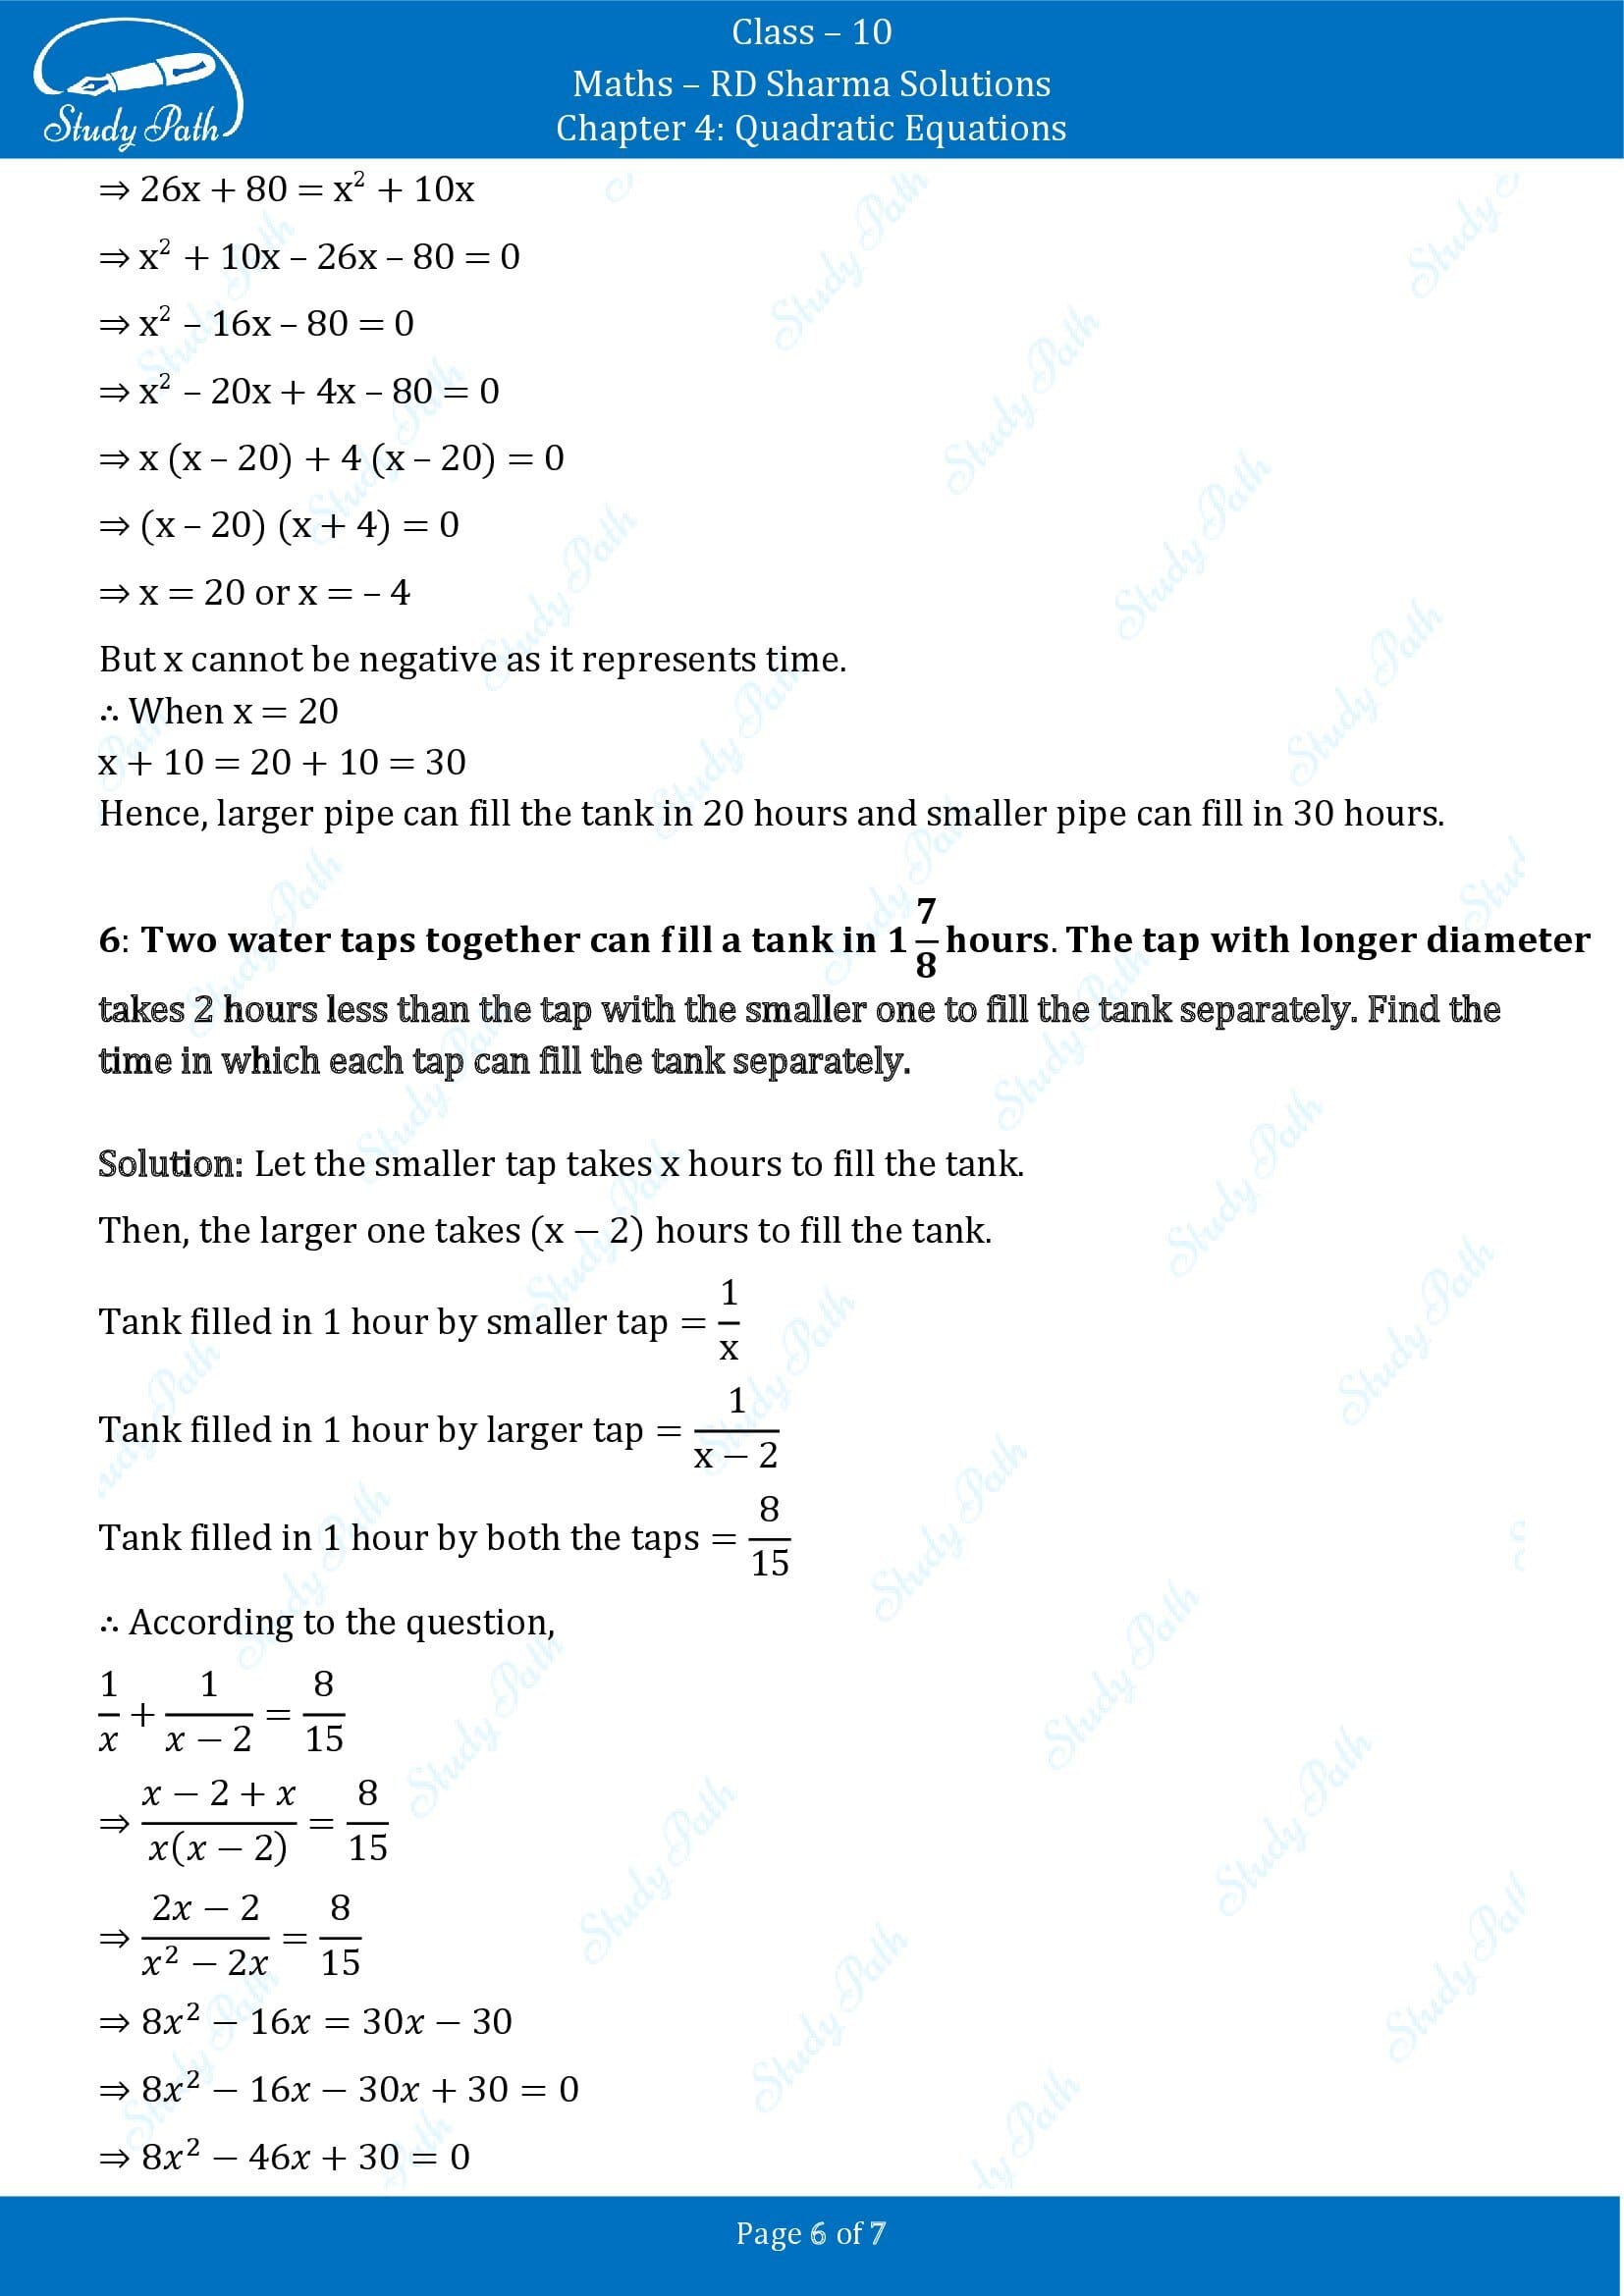 RD Sharma Solutions Class 10 Chapter 4 Quadratic Equations Exercise 4.12 00006